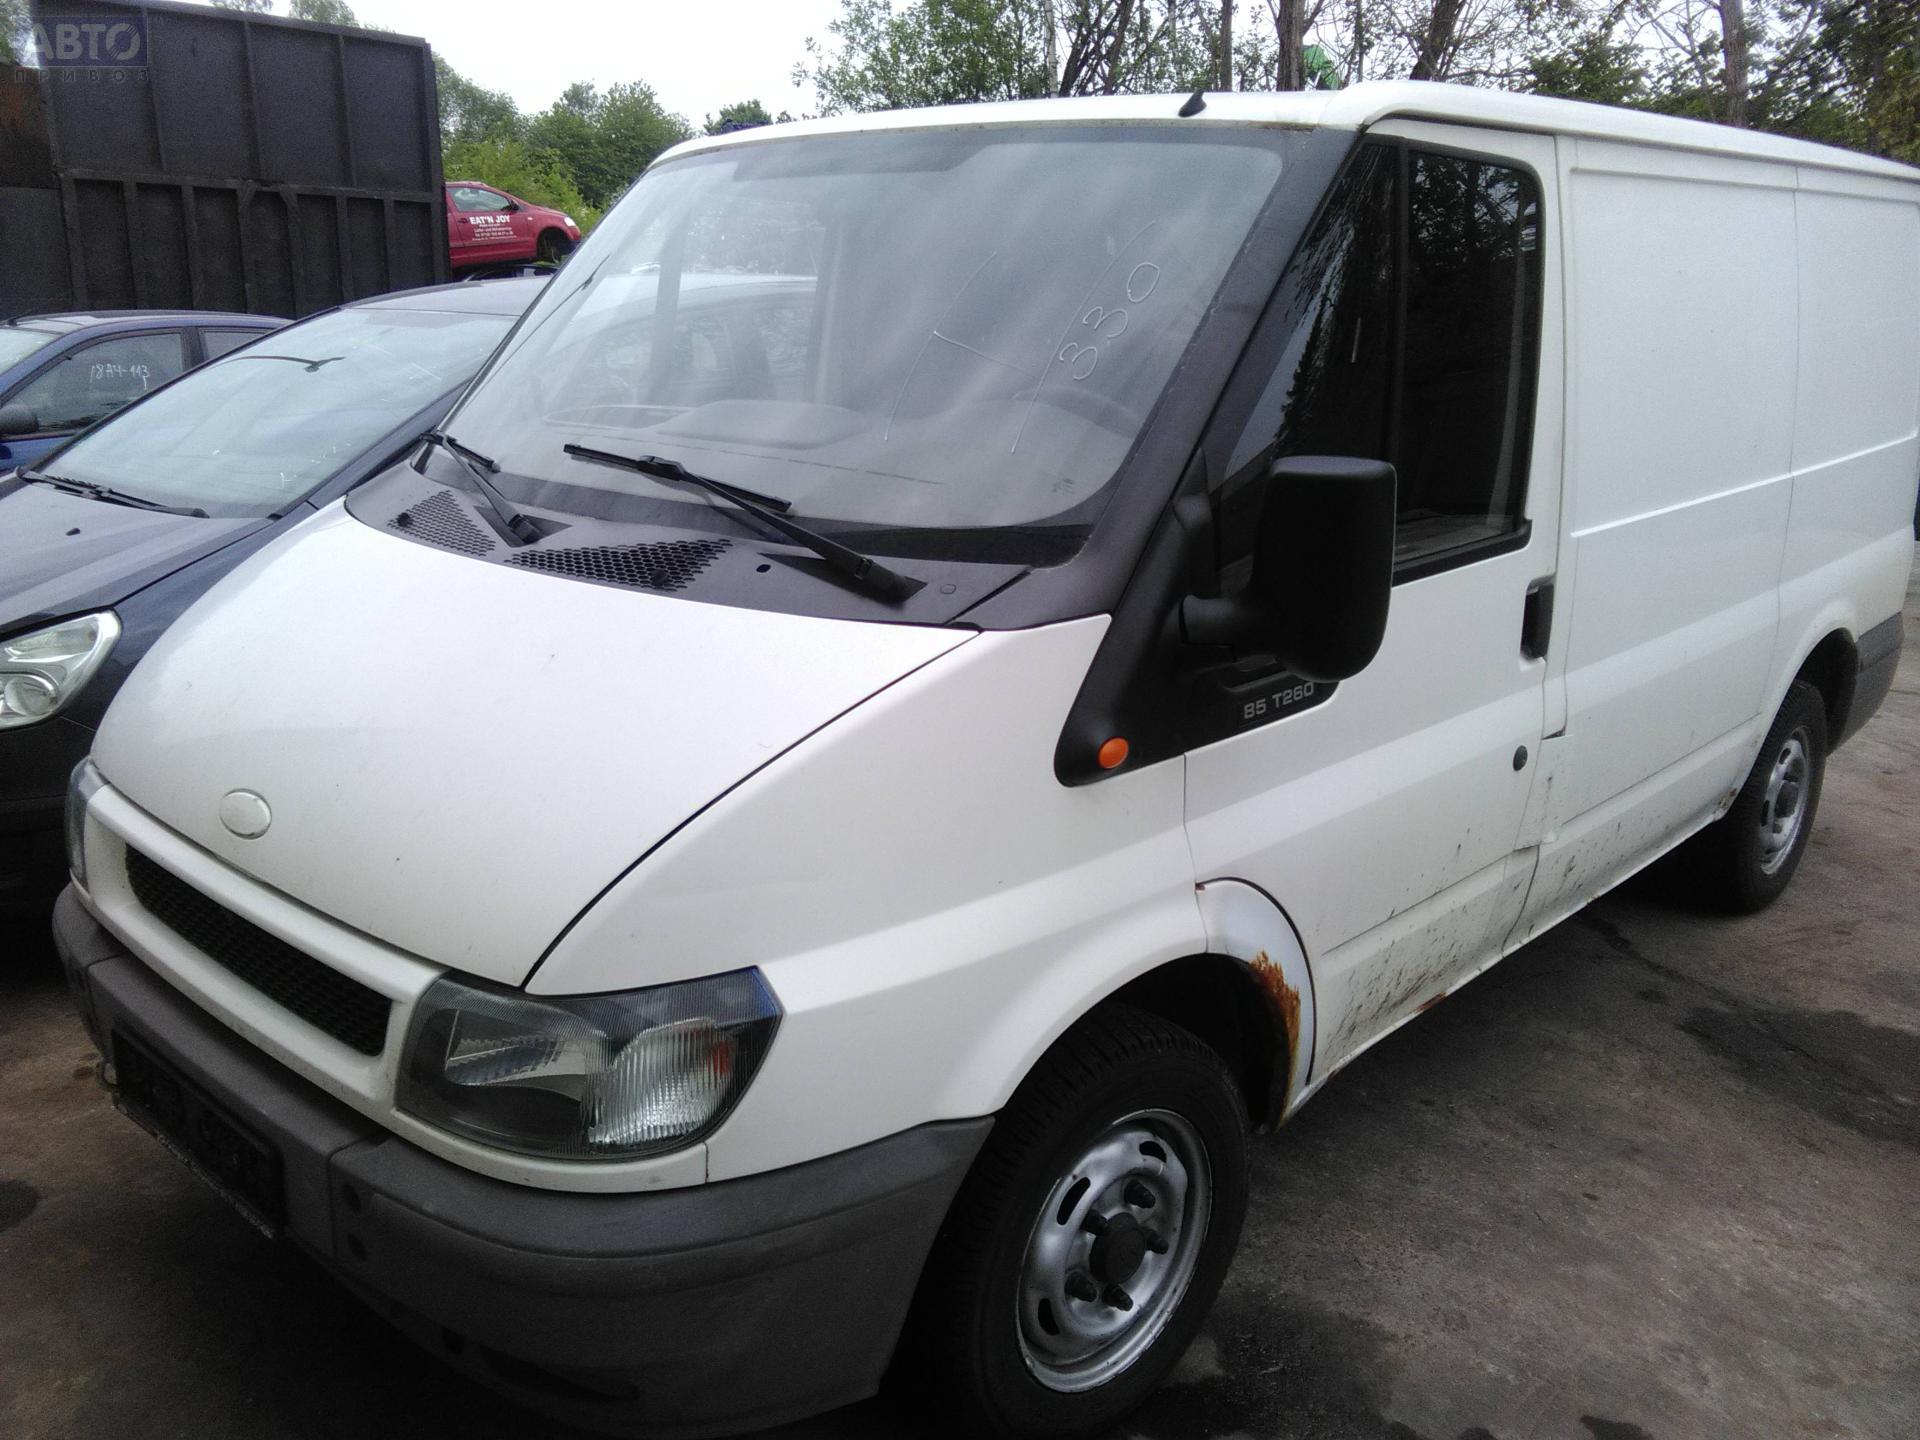 Форд транзит 2.0 2000 2006. Ford Transit 2000. Ford Transit (2000-2005). Форд Транзит 2000 года дизель. Ford Transit 2000-2014.